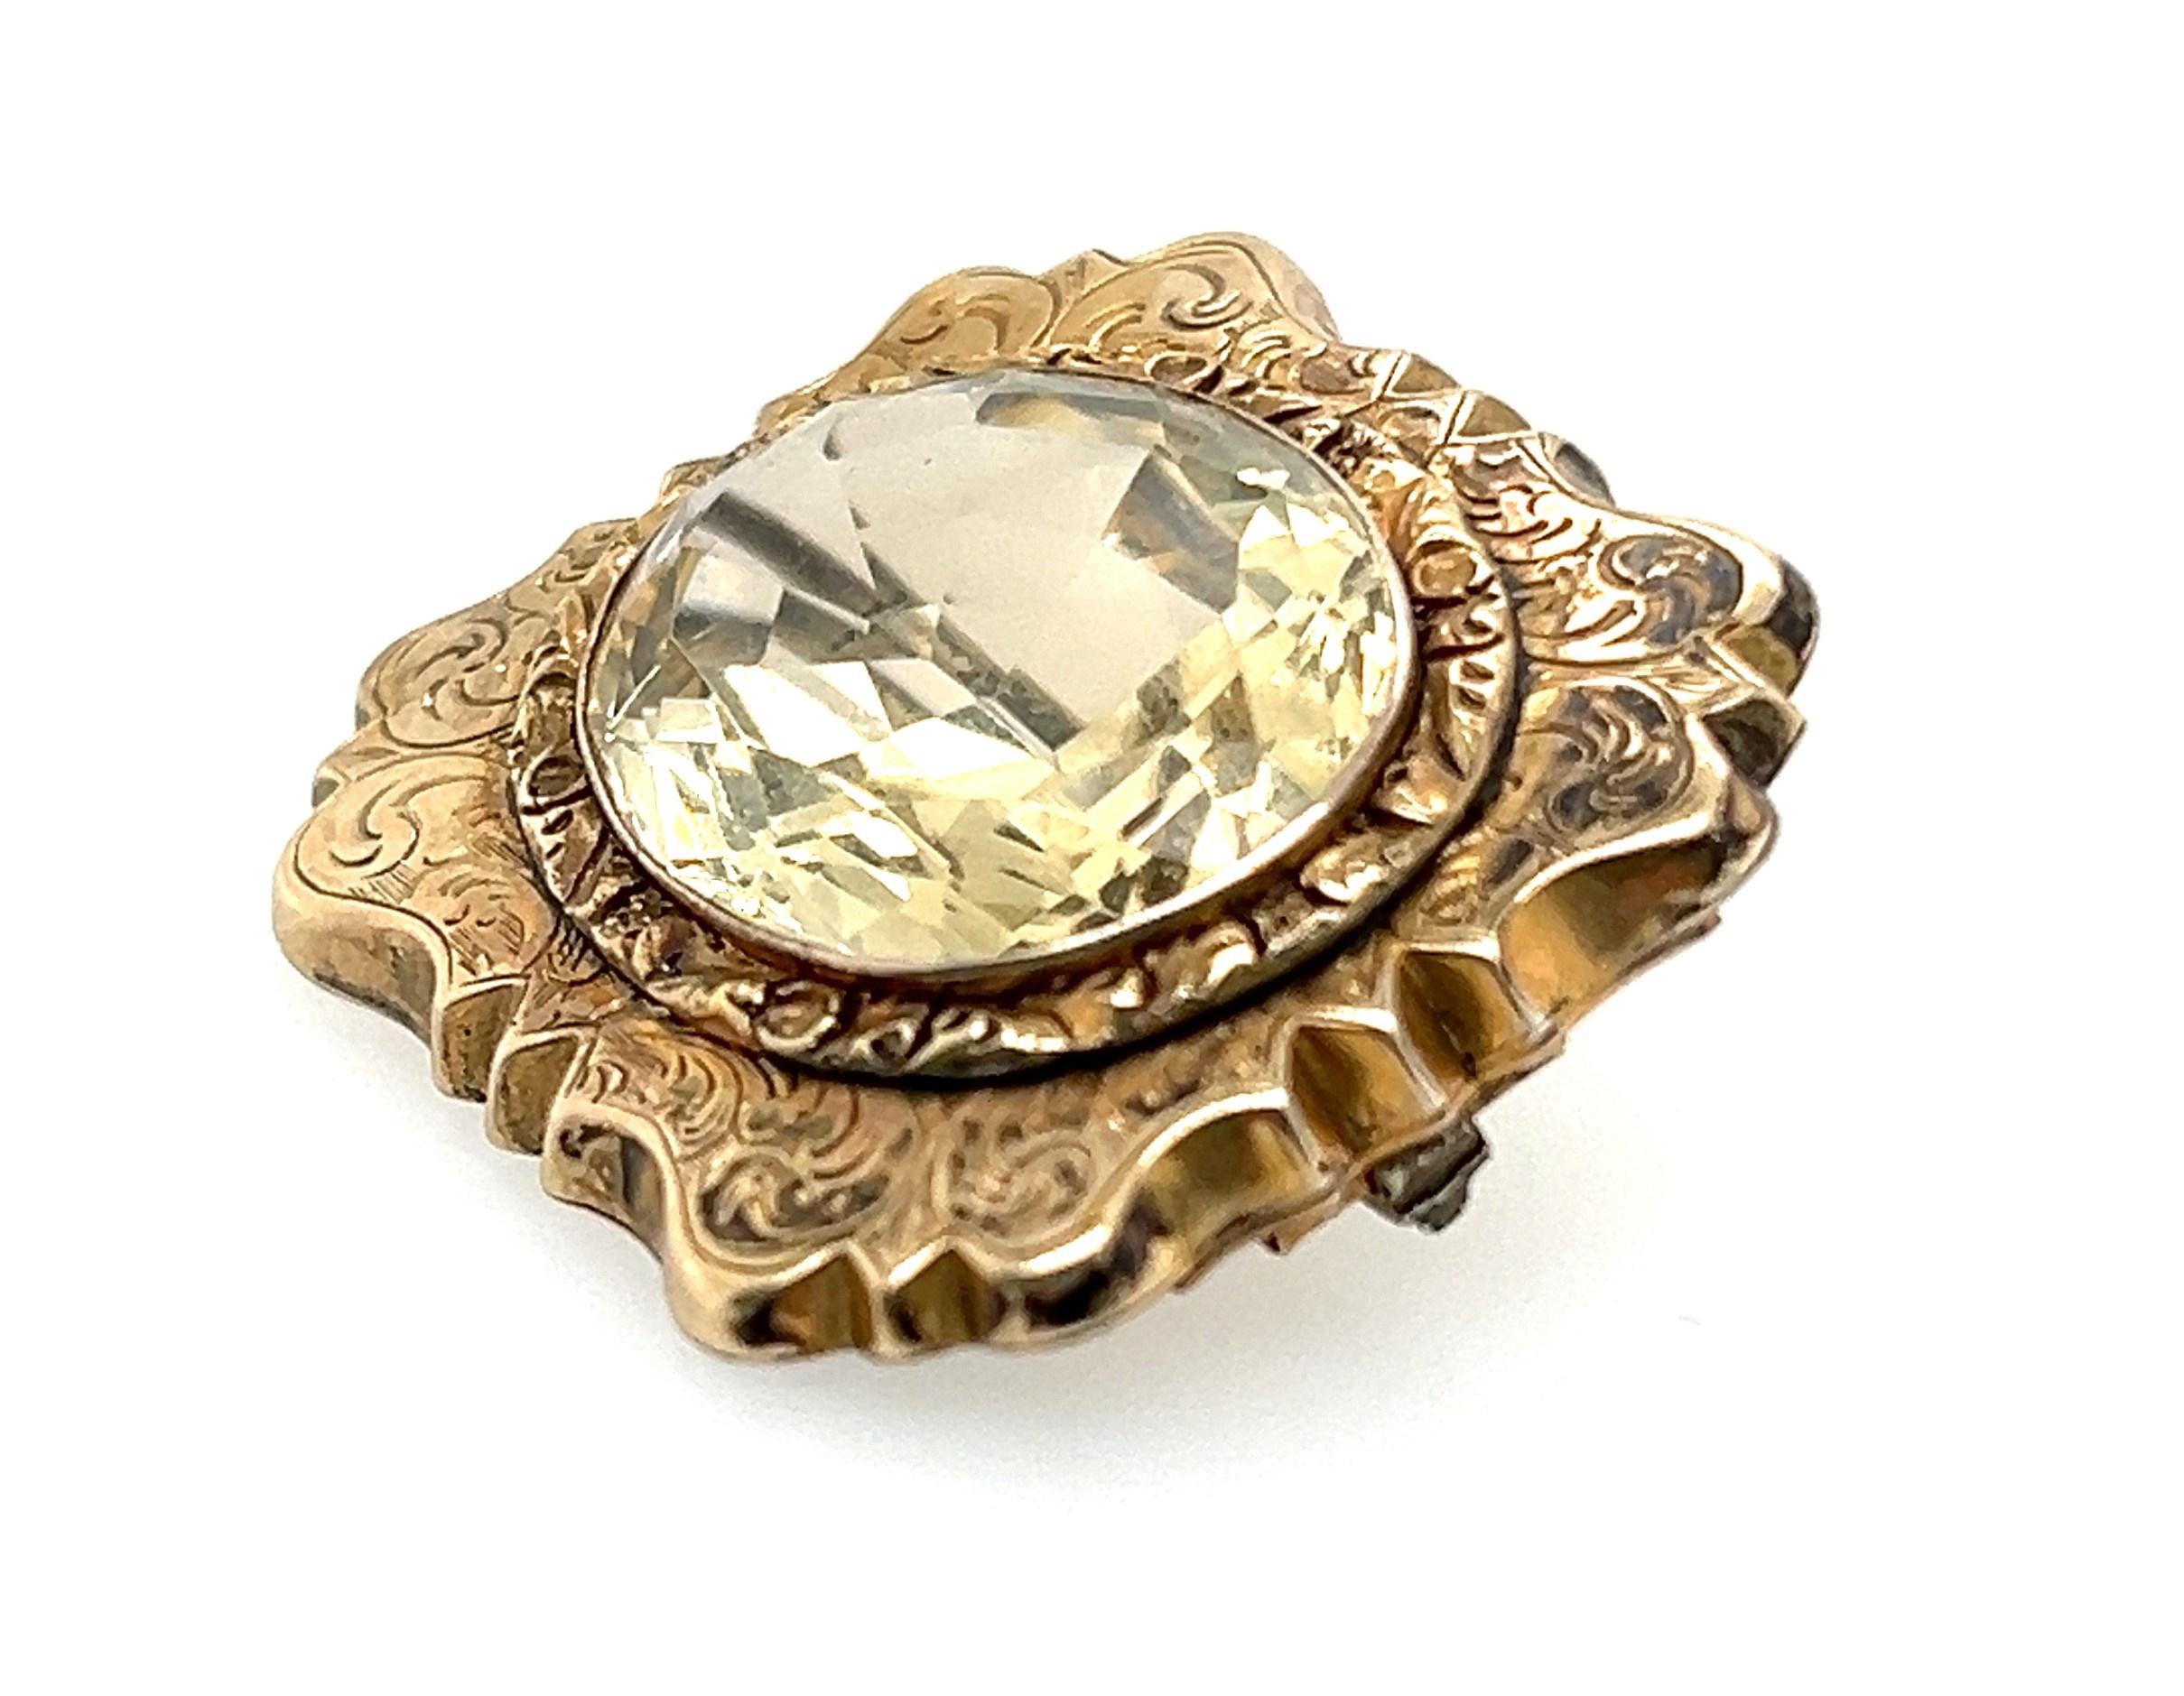 Fabulous Antique brooch with repoussé setting and scroll work in the 10kt yellow gold. This brooch was made around the last few decades of the 1800s, Circa 1880. There were two Gothic Revival styles in the 1800s and this is from the latter. It bears